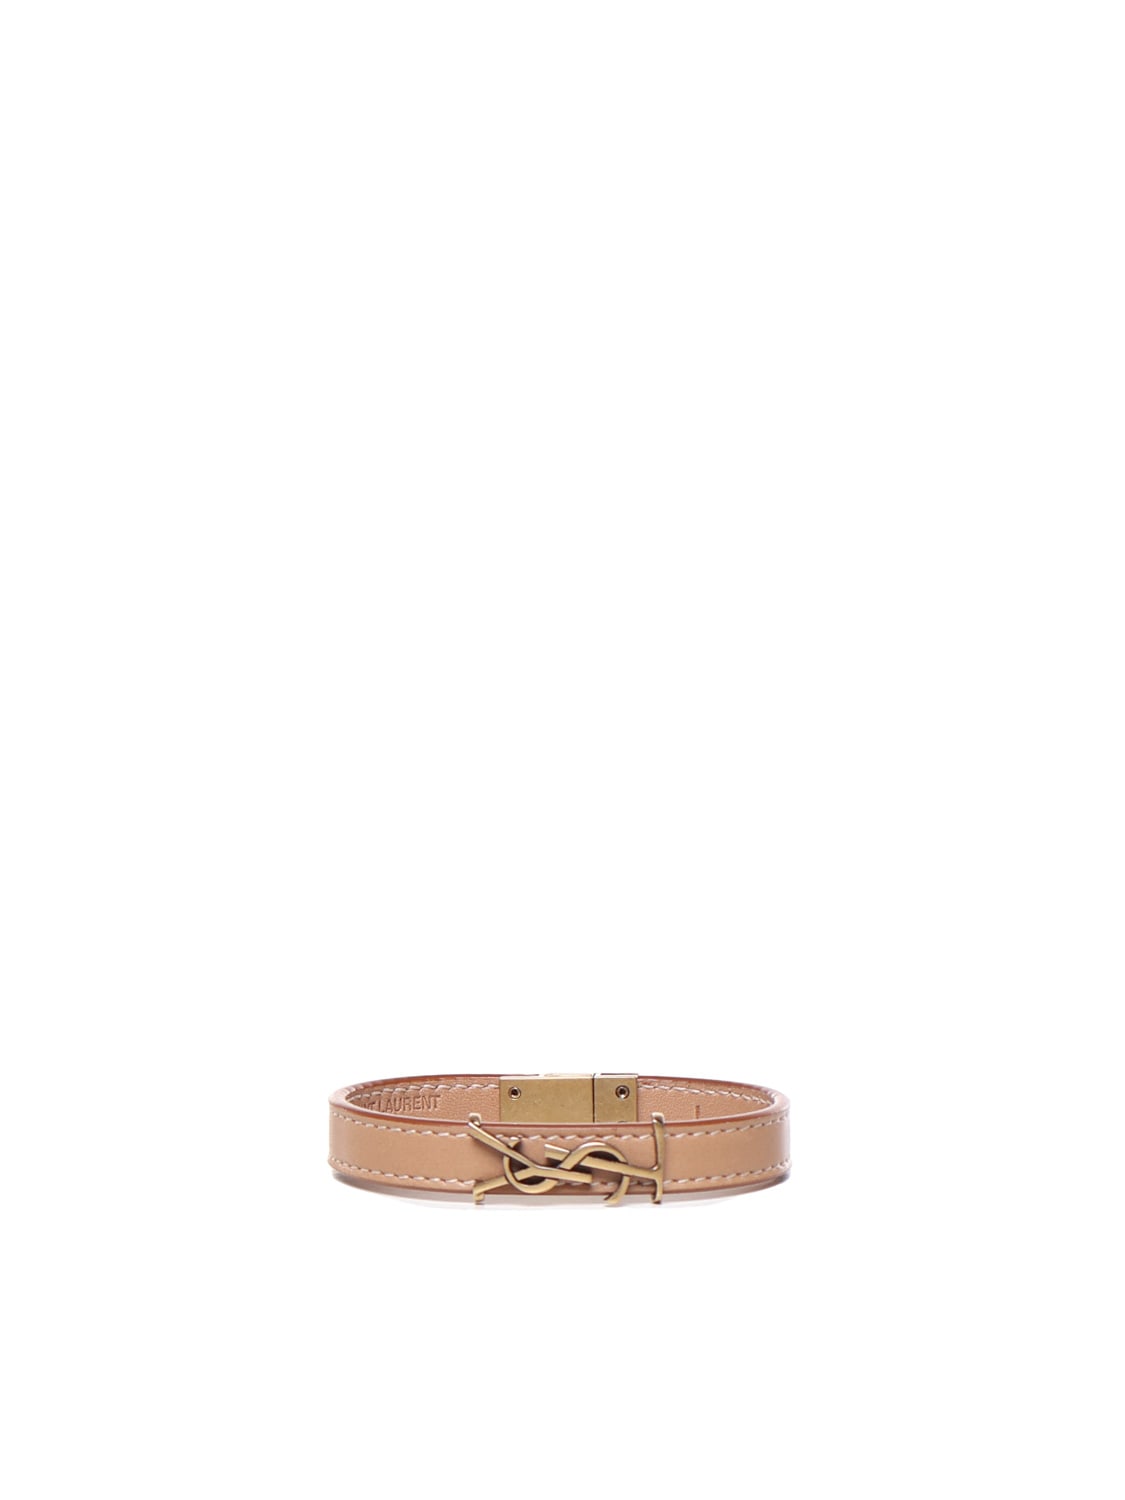 SAINT LAURENT OPYUM BRACELET IN VEGETABLE TANNED LEATHER AND METAL